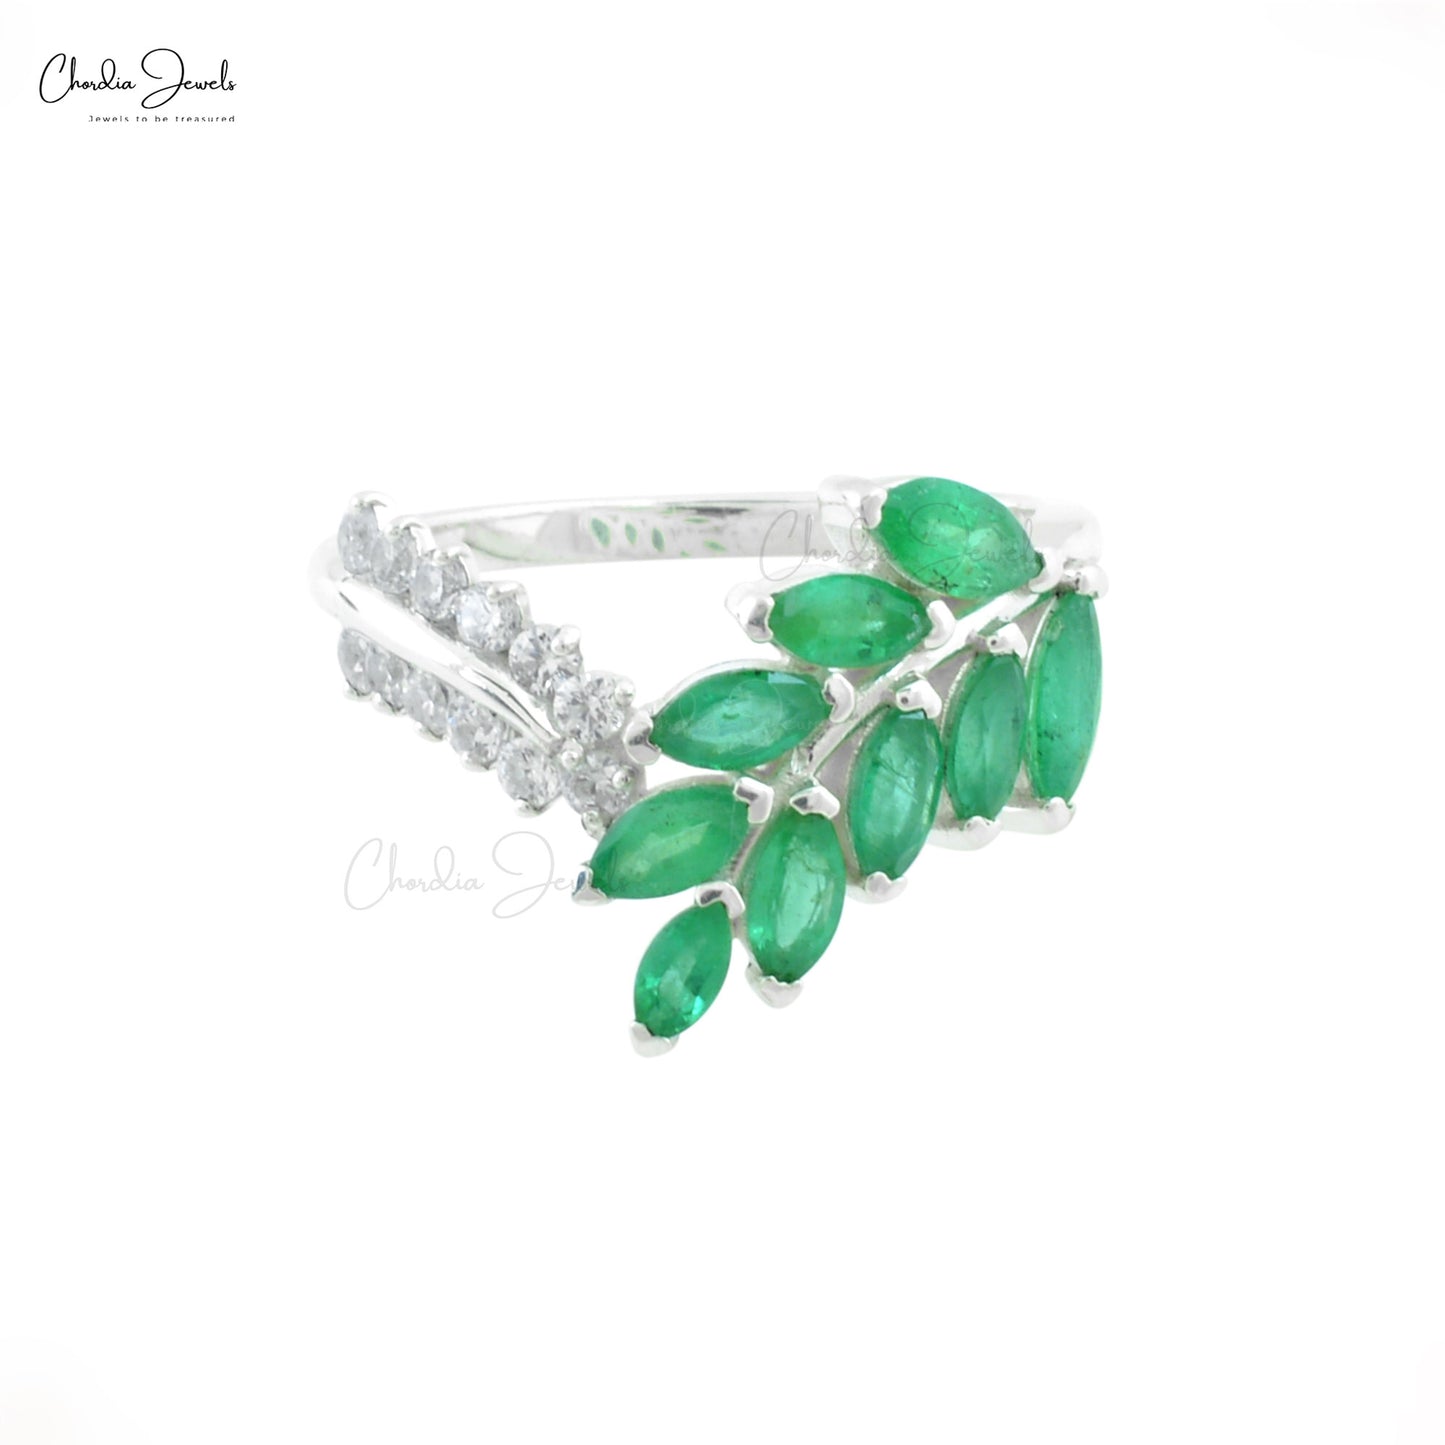 High Quality Jewelry Emerald & Zircon Bypass Ring in 925 Sterling Silver At Offer Price for Anniversary Gift